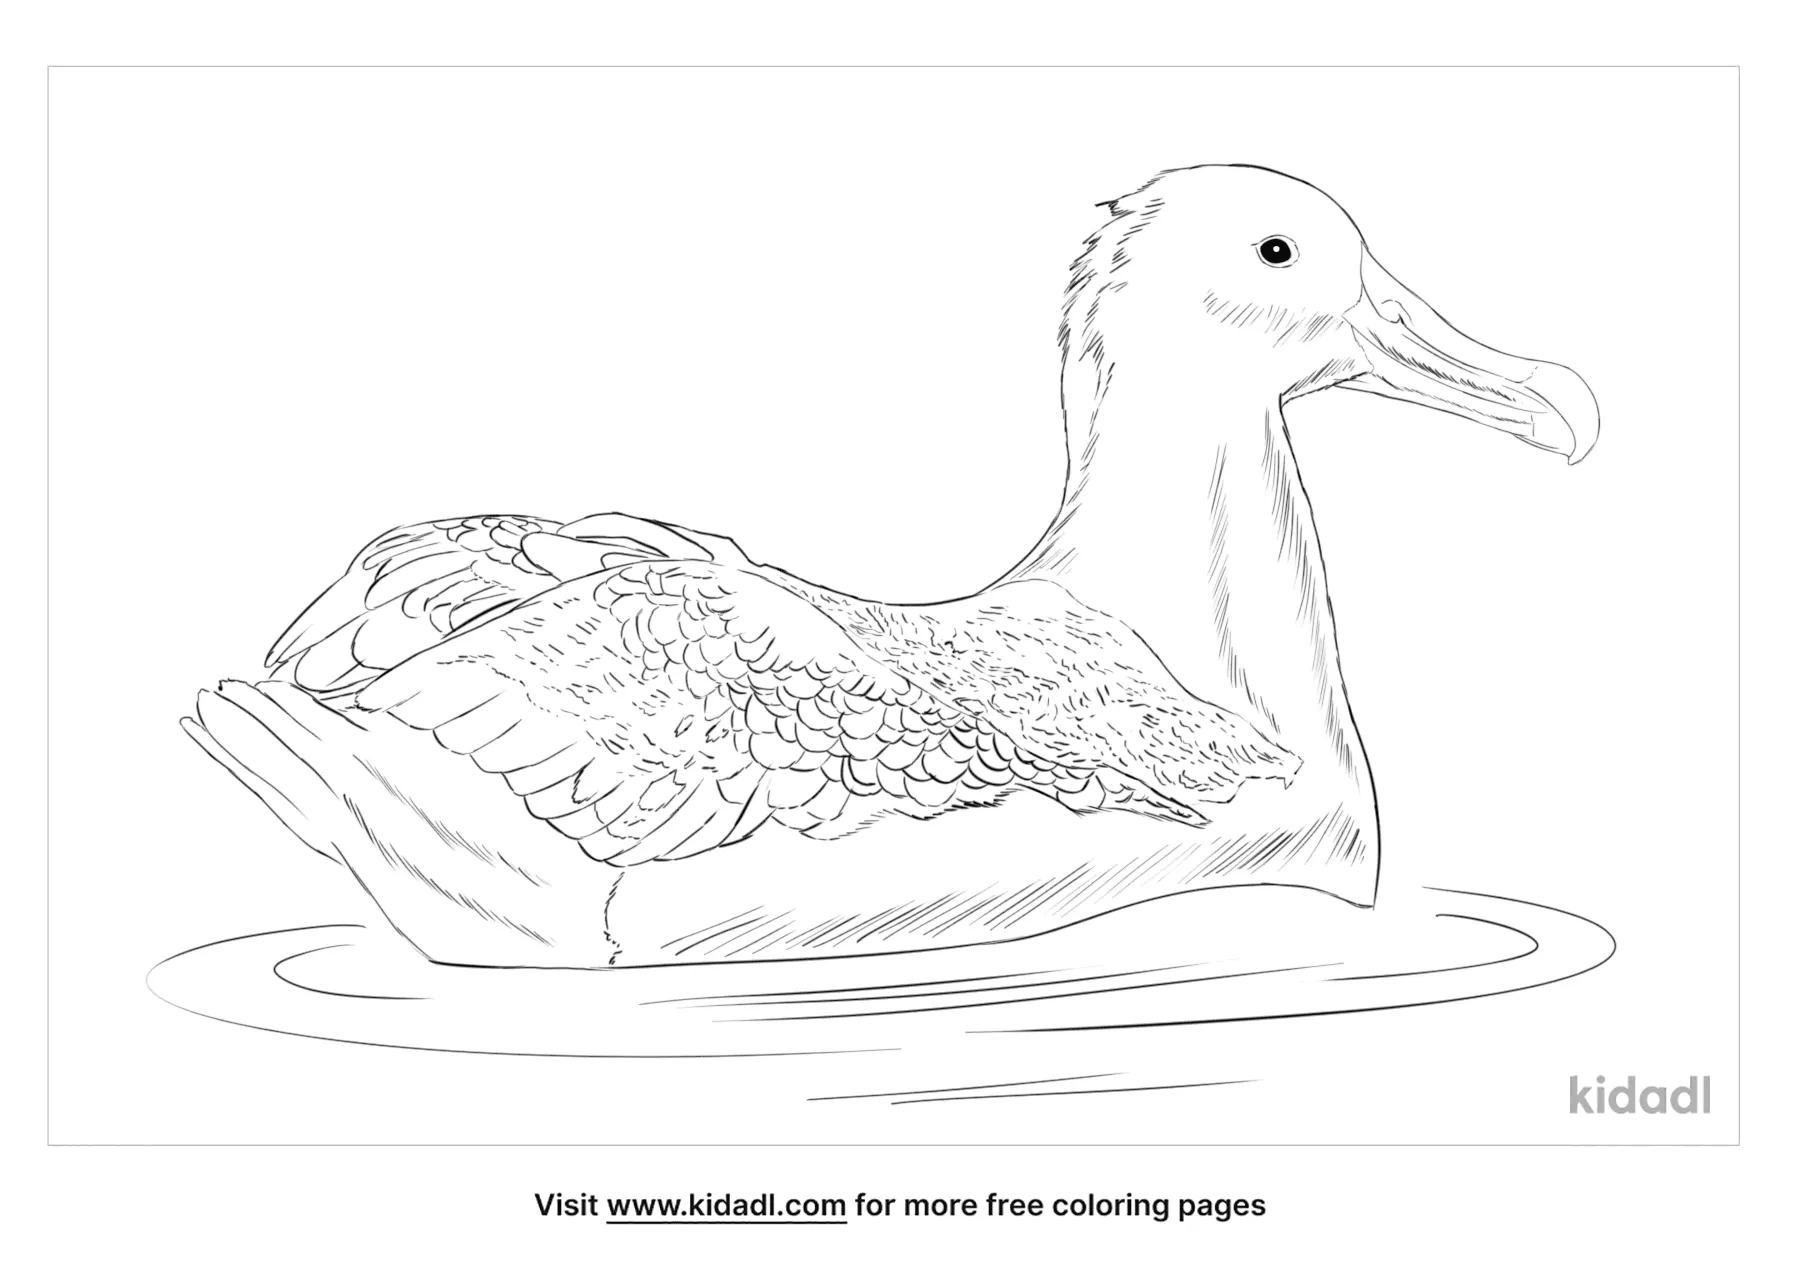 Great Albatross Coloring Page   Free Birds Coloring Page   Kidadl